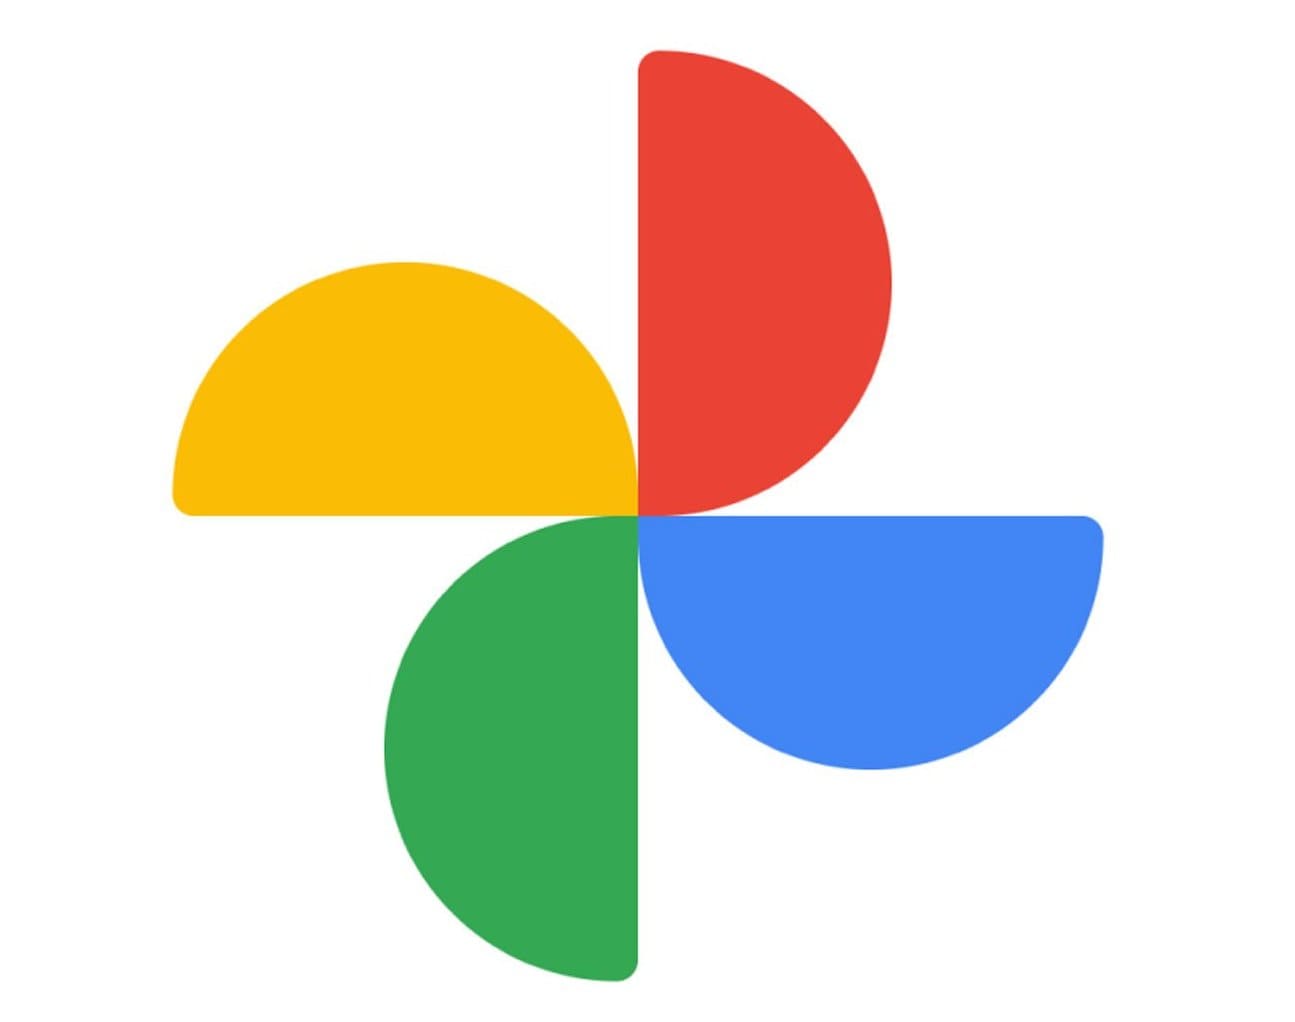 Download All Phones from Google Photos at Once